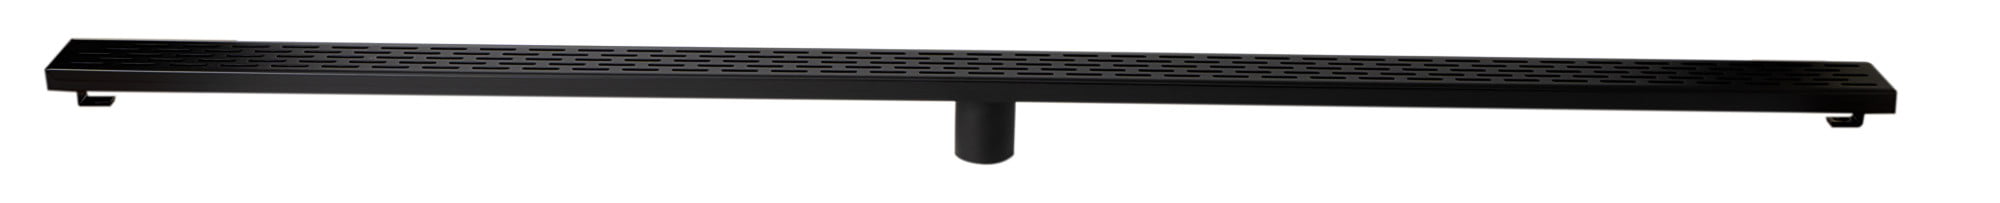 Abld59c-bm 59 In. Stainless Steel Linear Shower Drain With Groove Holes, Black Matte